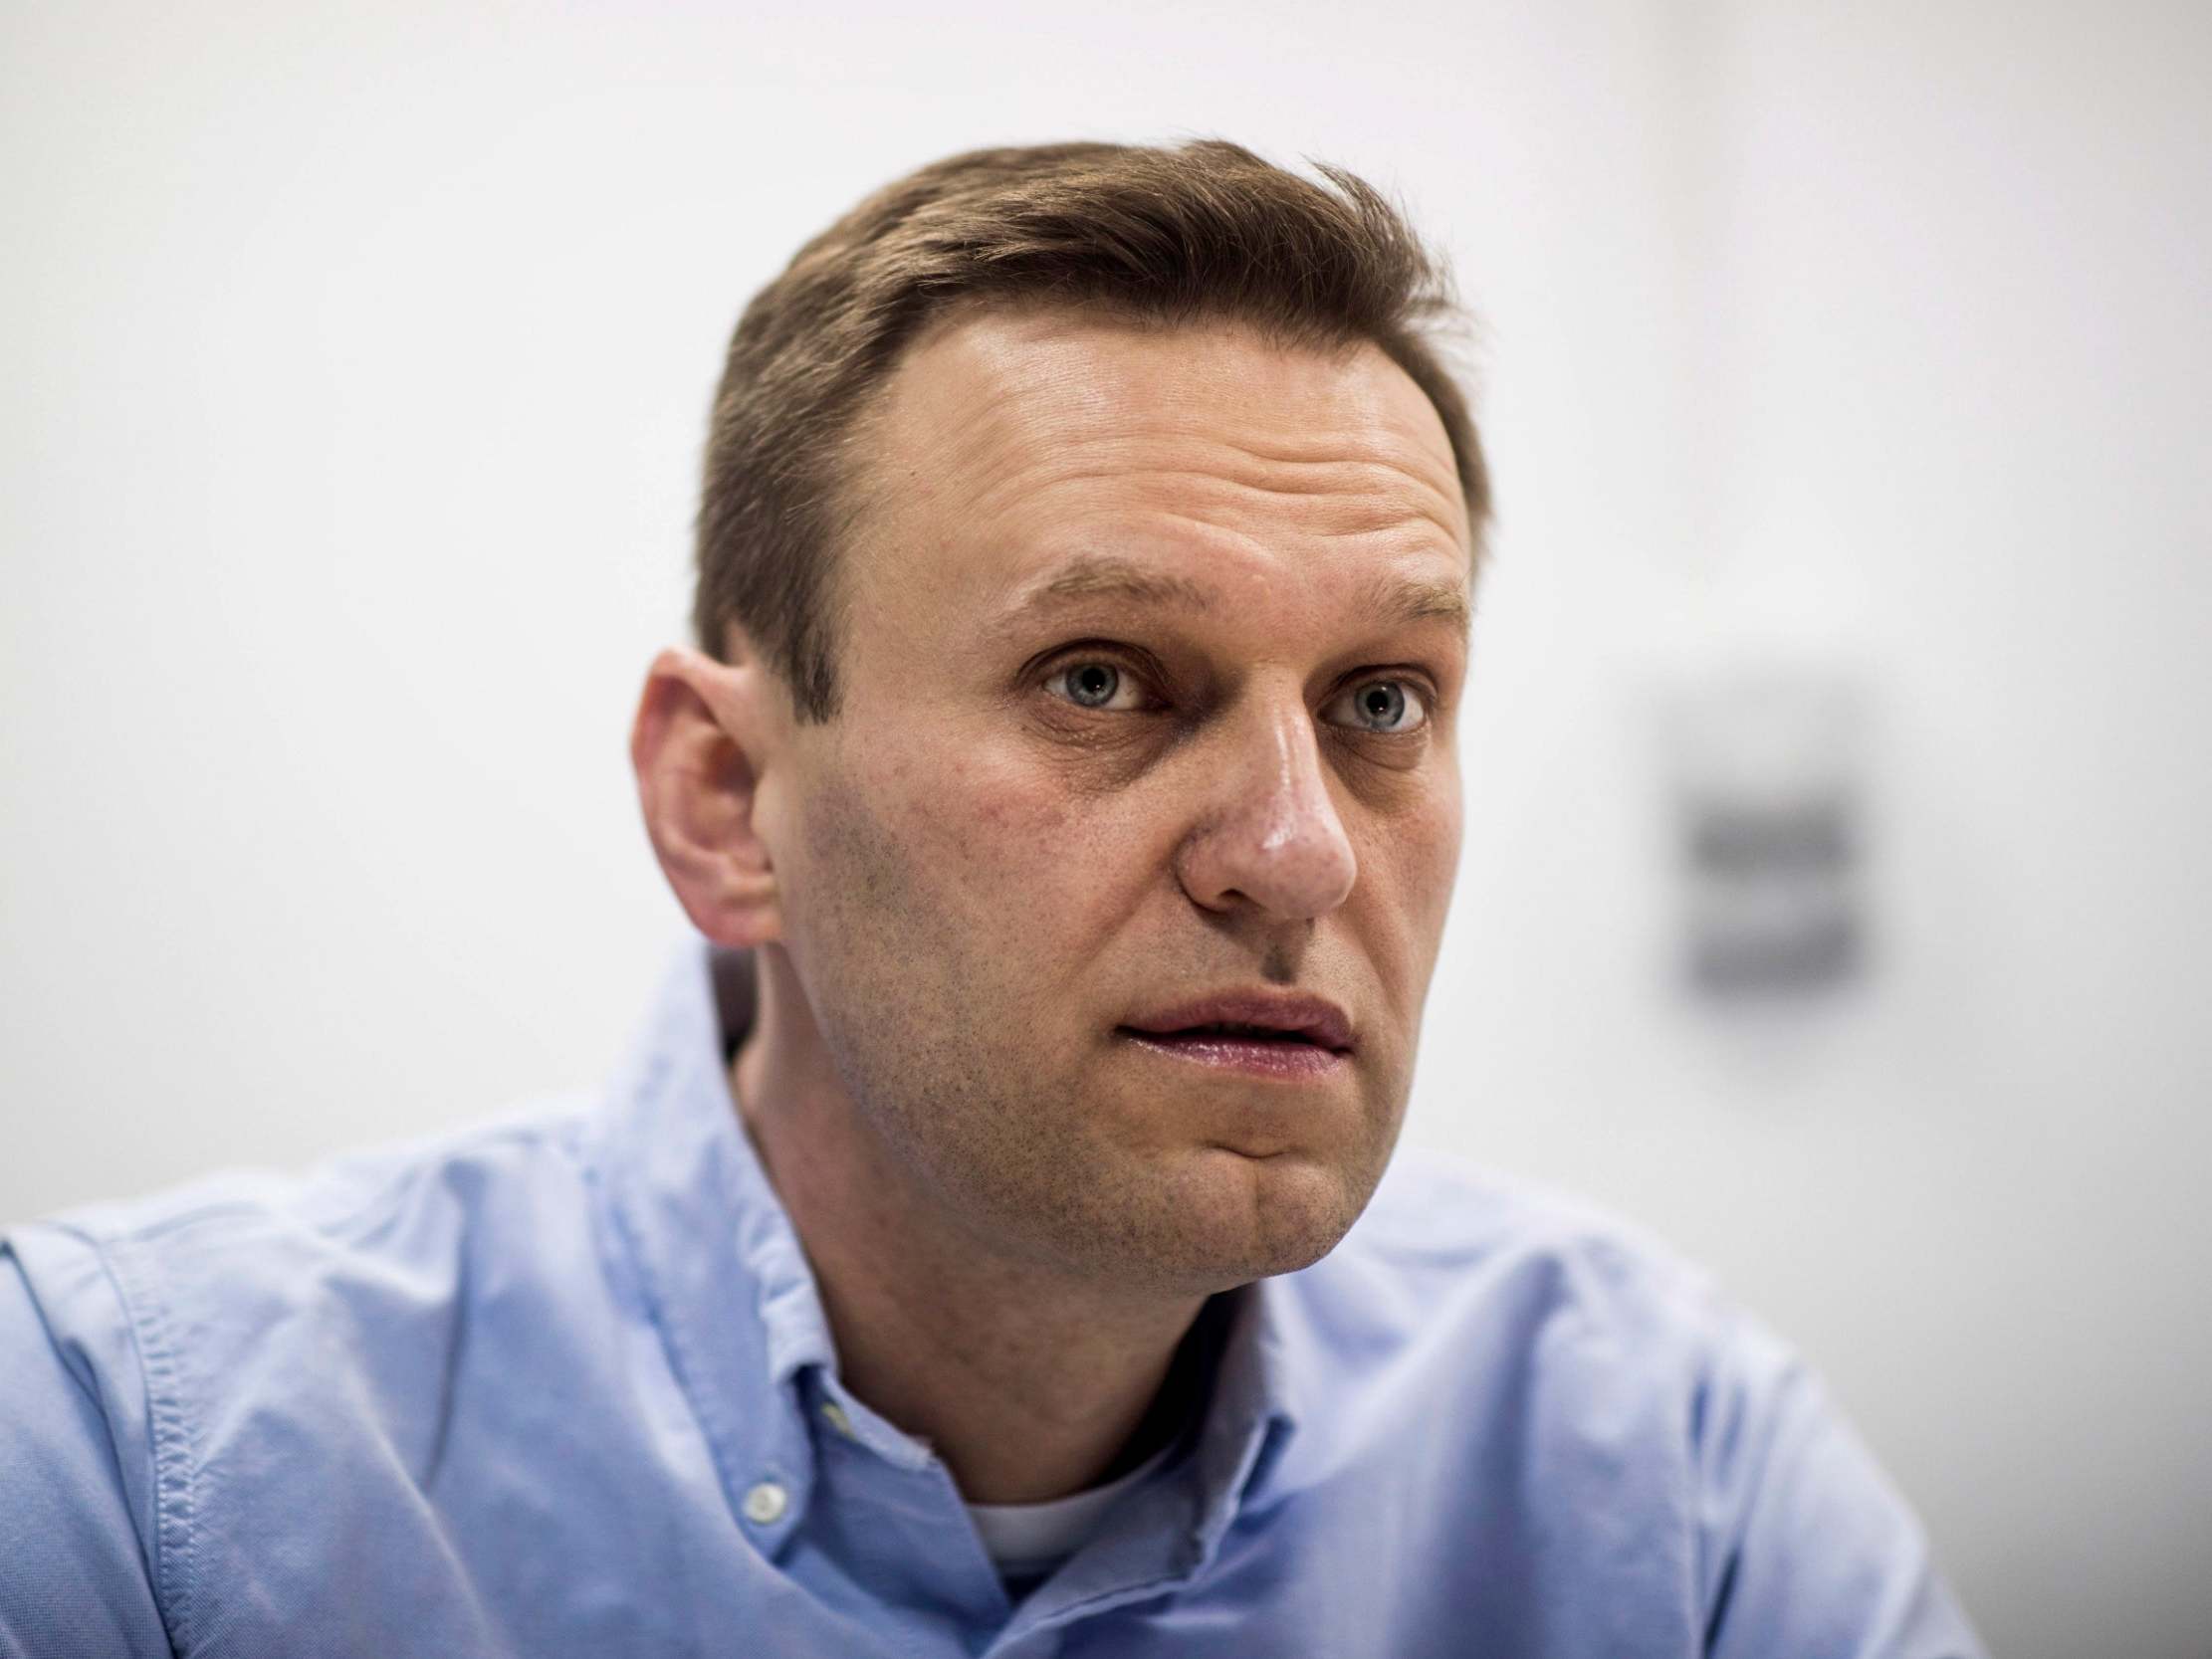 alexei-navalny-poisoning-shows-russia-will-carry-on-and-get-away-with